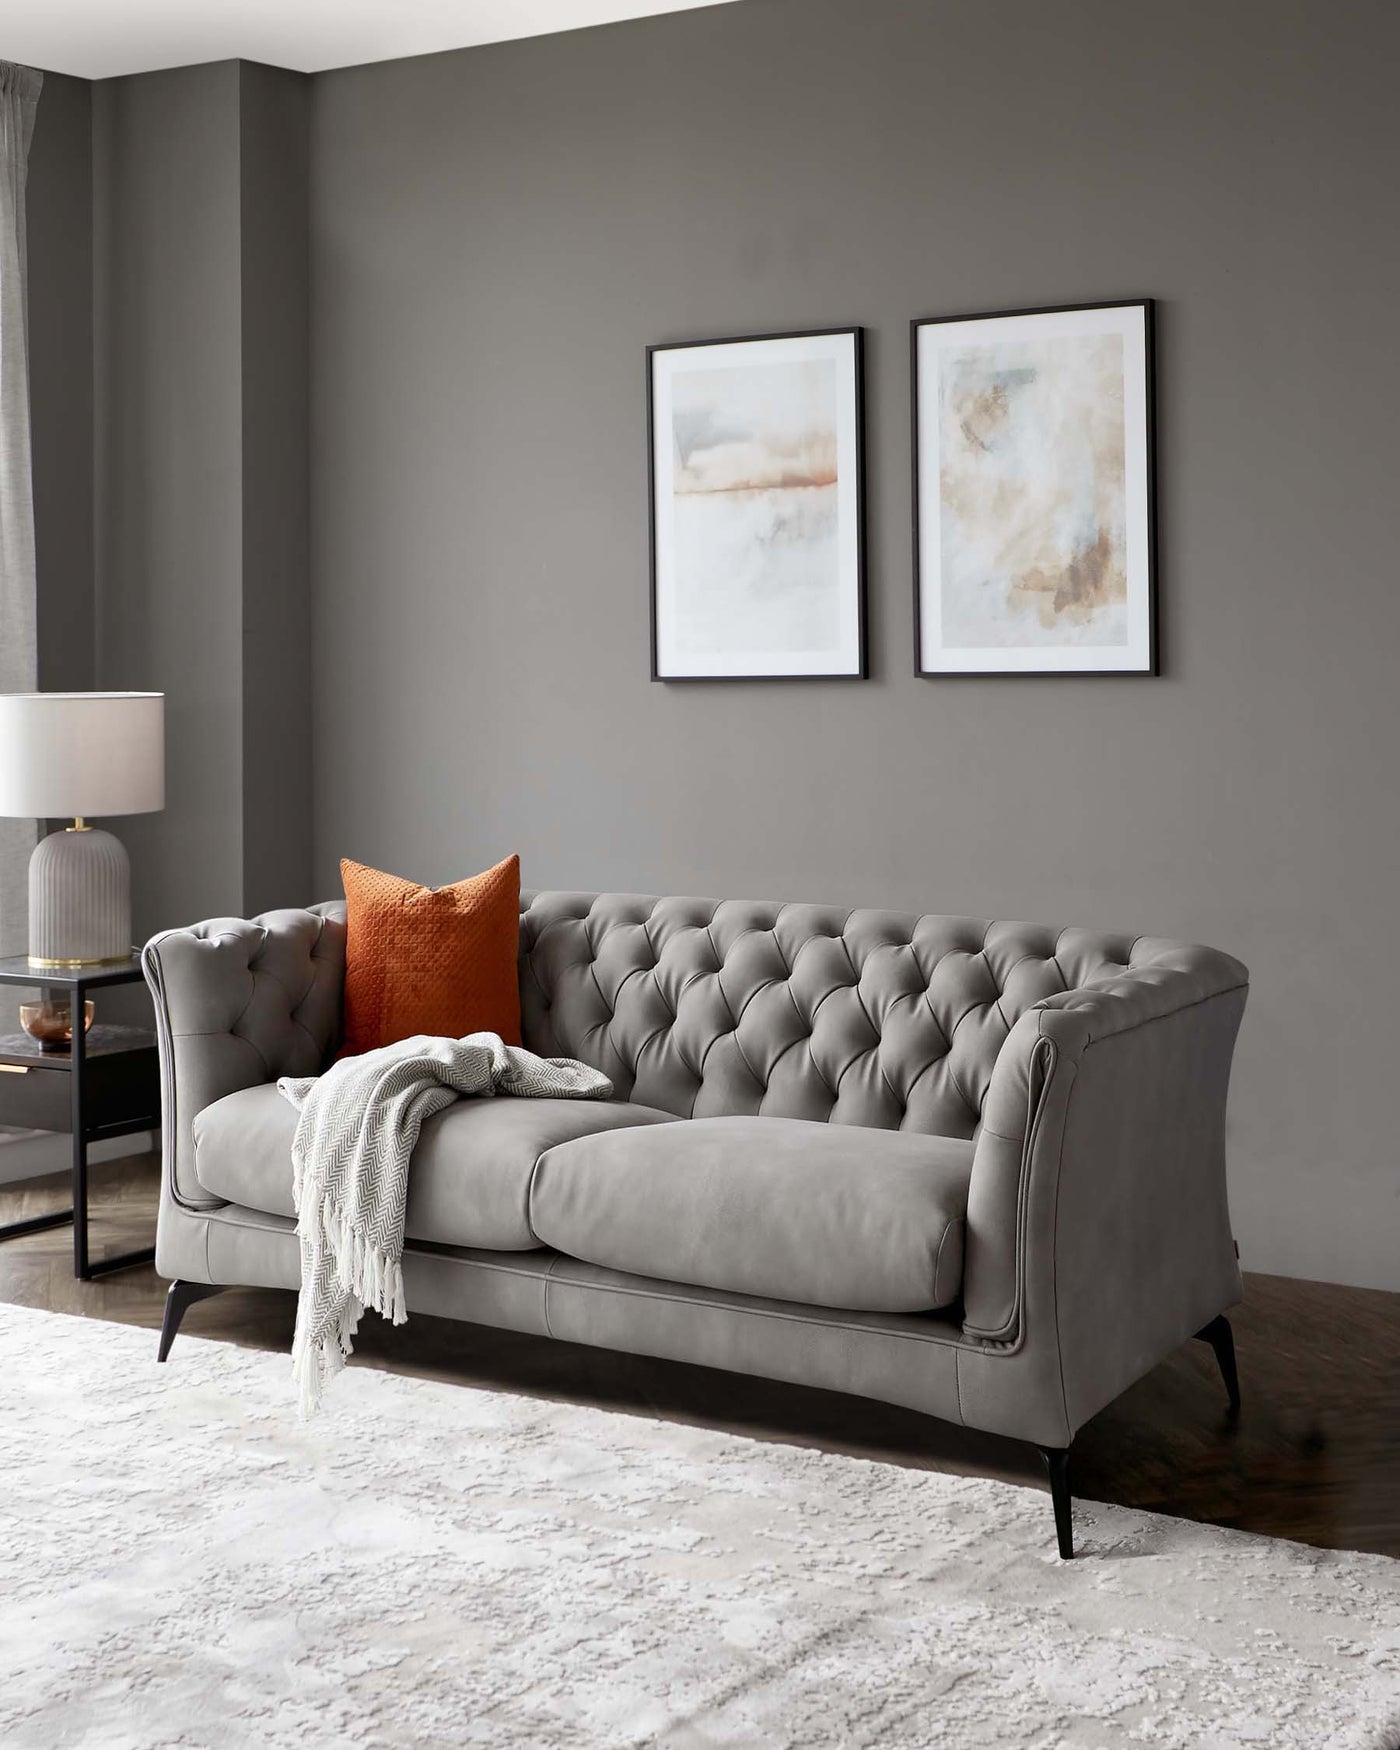 Elegant grey tufted sofa with rolled arms and black wooden legs, adorned with a burnt orange velvet cushion and a light grey woven throw blanket.